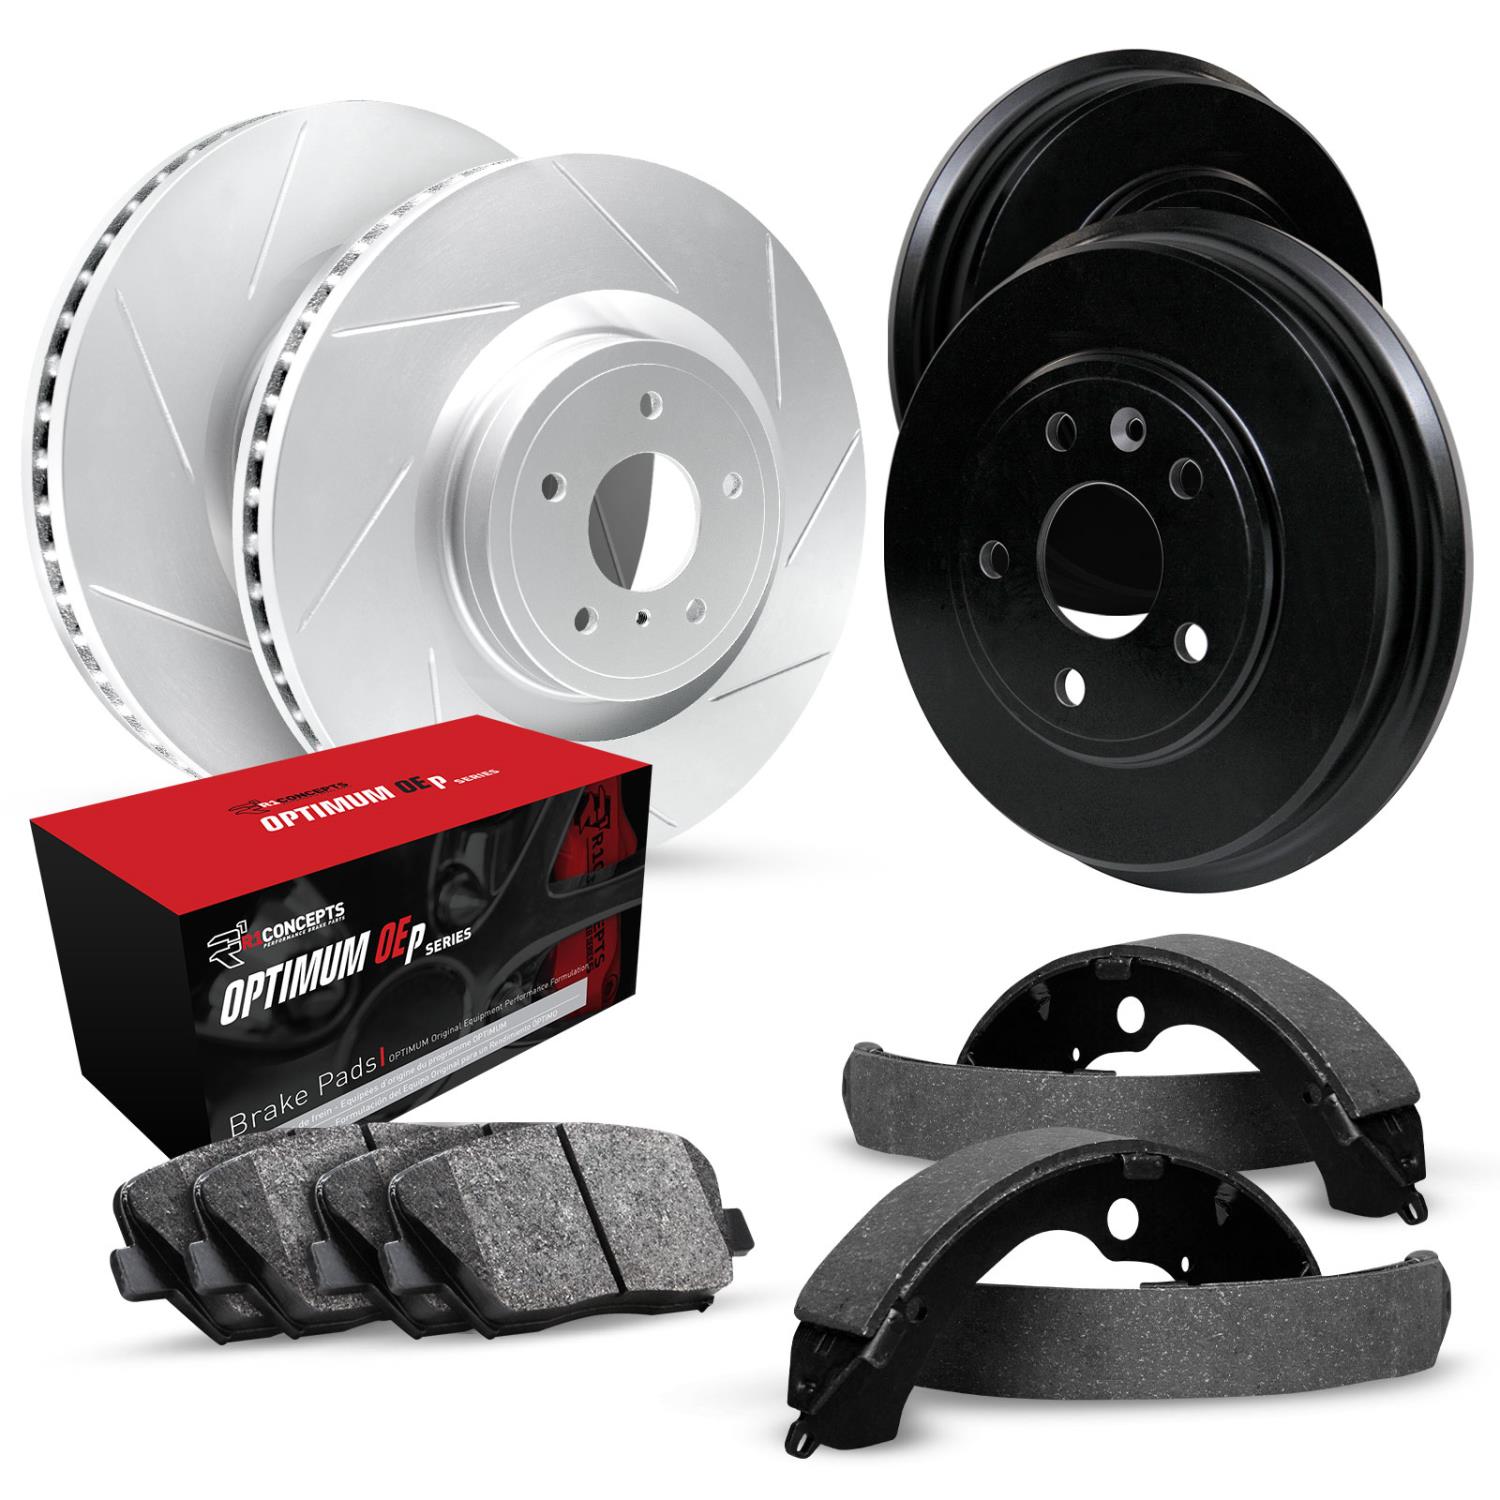 GEO-Carbon Slotted Brake Rotor & Drum Set w/Optimum OE Pads & Shoes, 1985-1997 Infiniti/Nissan, Position: Front & Rear